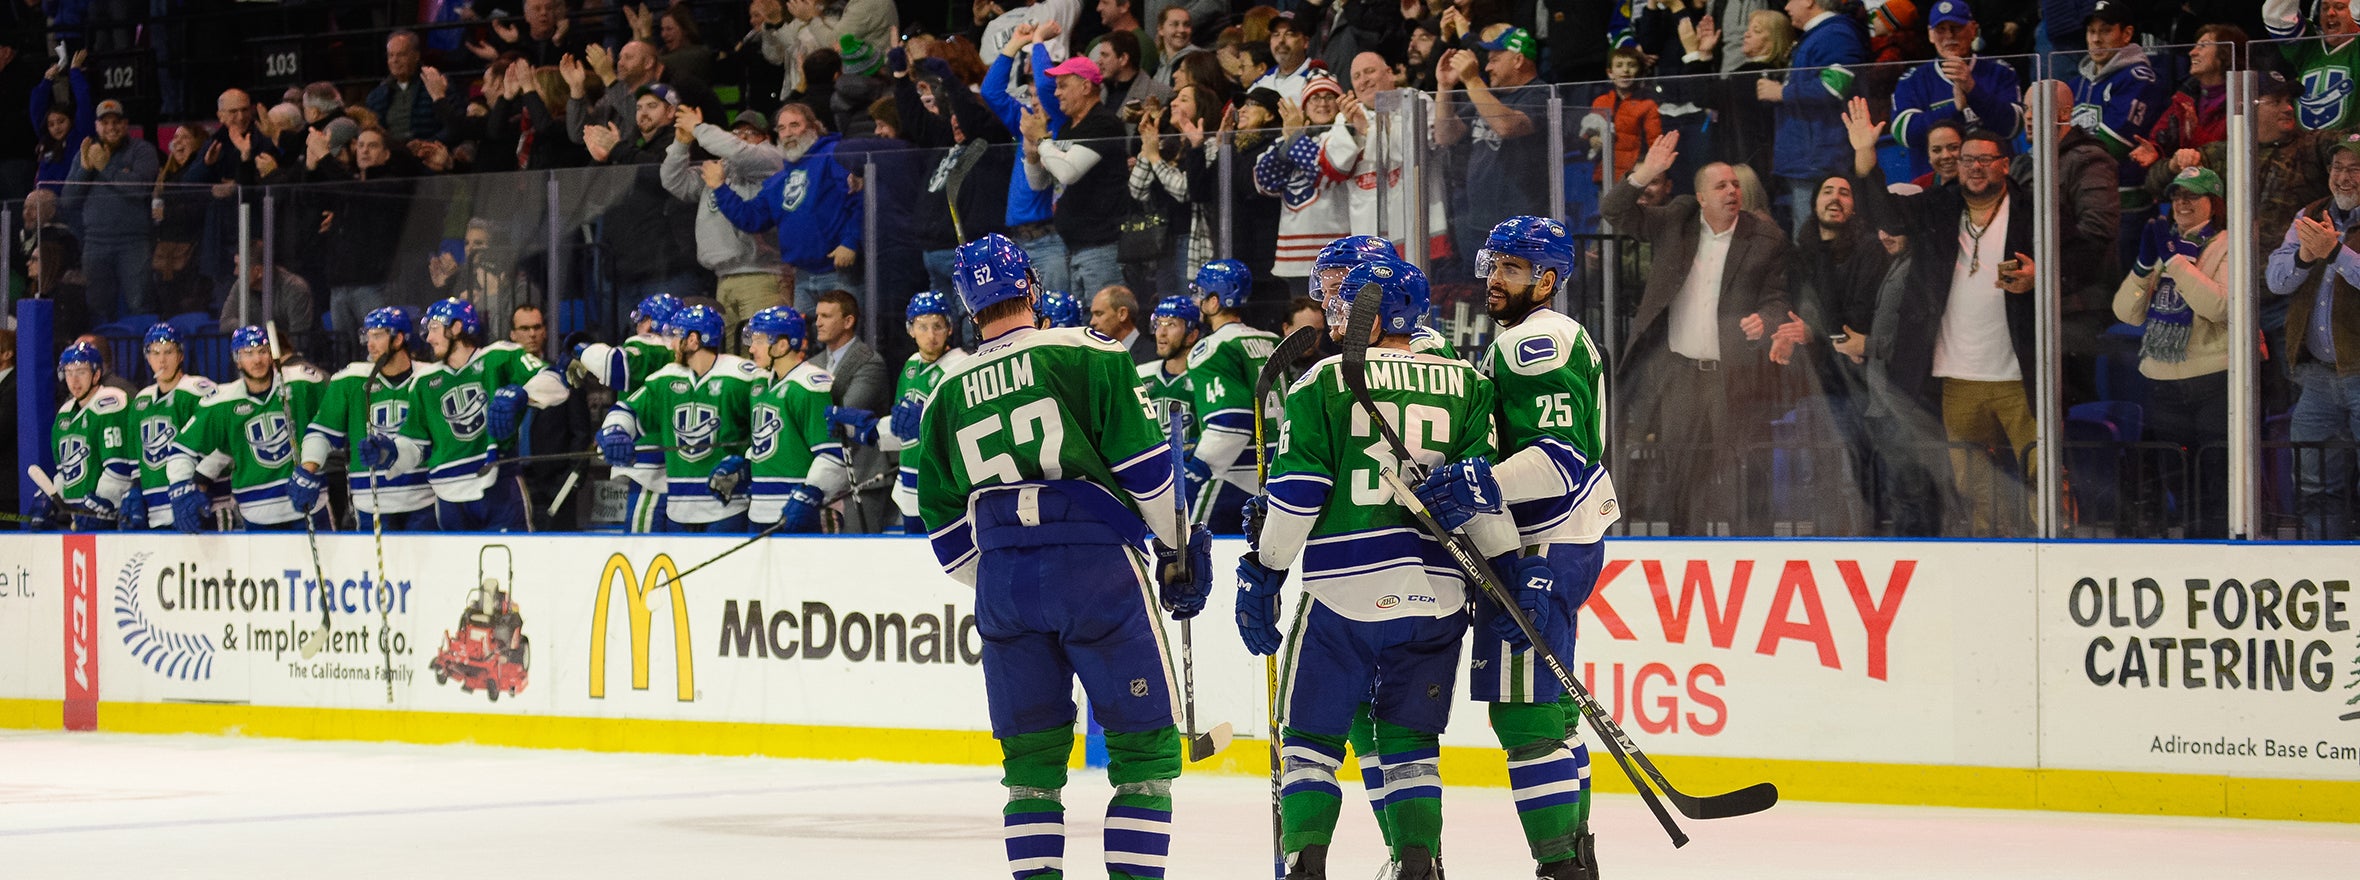 BACHMAN’S BIG NIGHT CARRIES COMETS TO WIN OVER CRUNCH